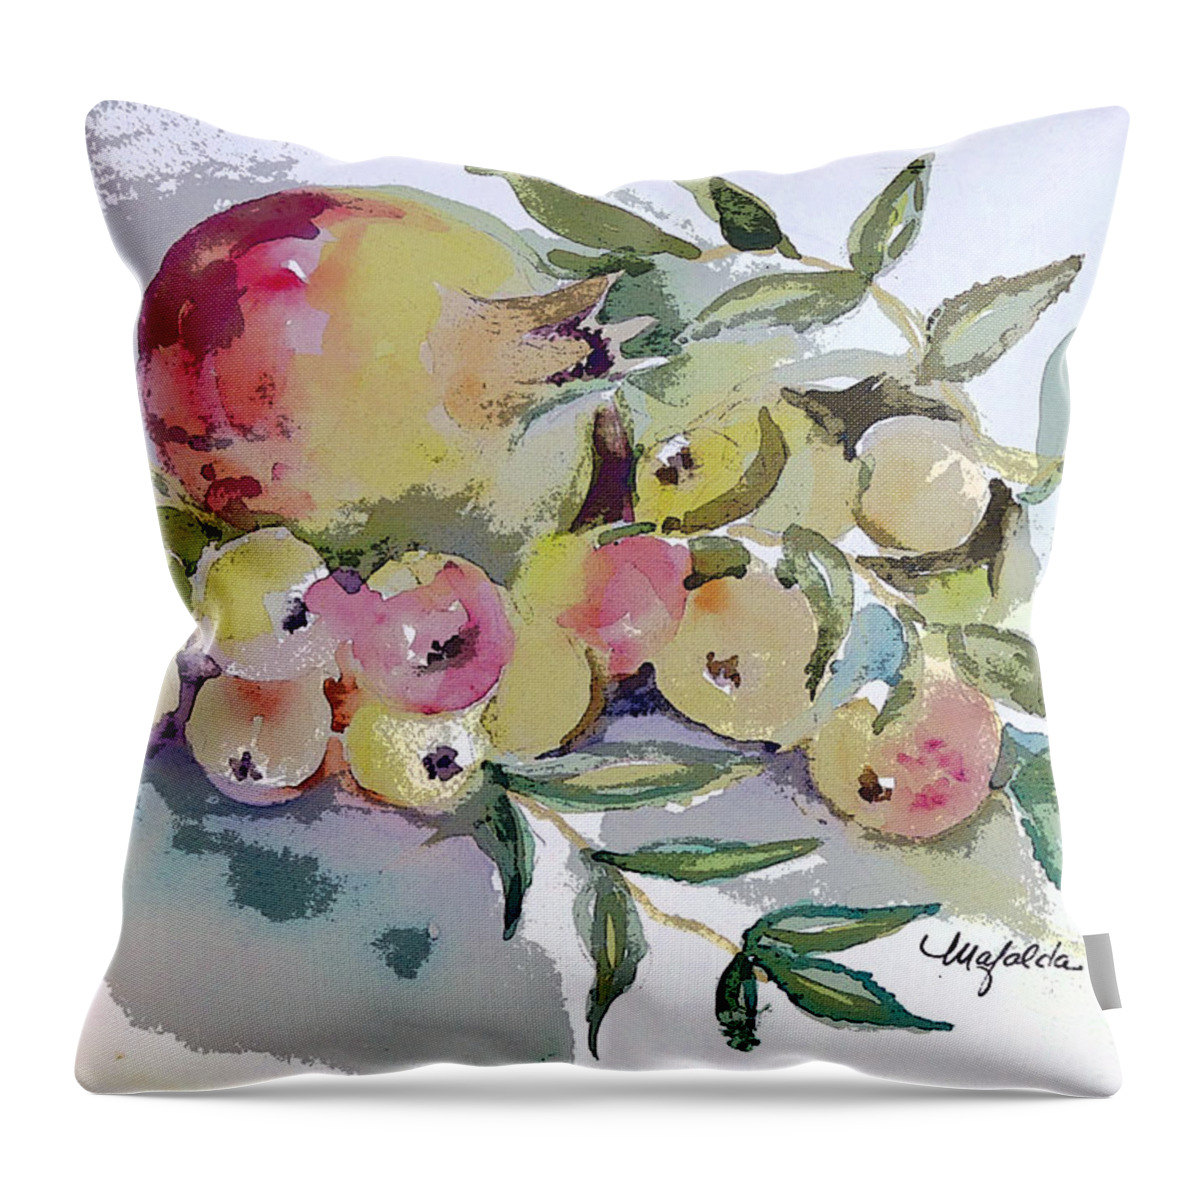 Still Life Throw Pillow featuring the painting Sicilian Fruits by Mafalda Cento